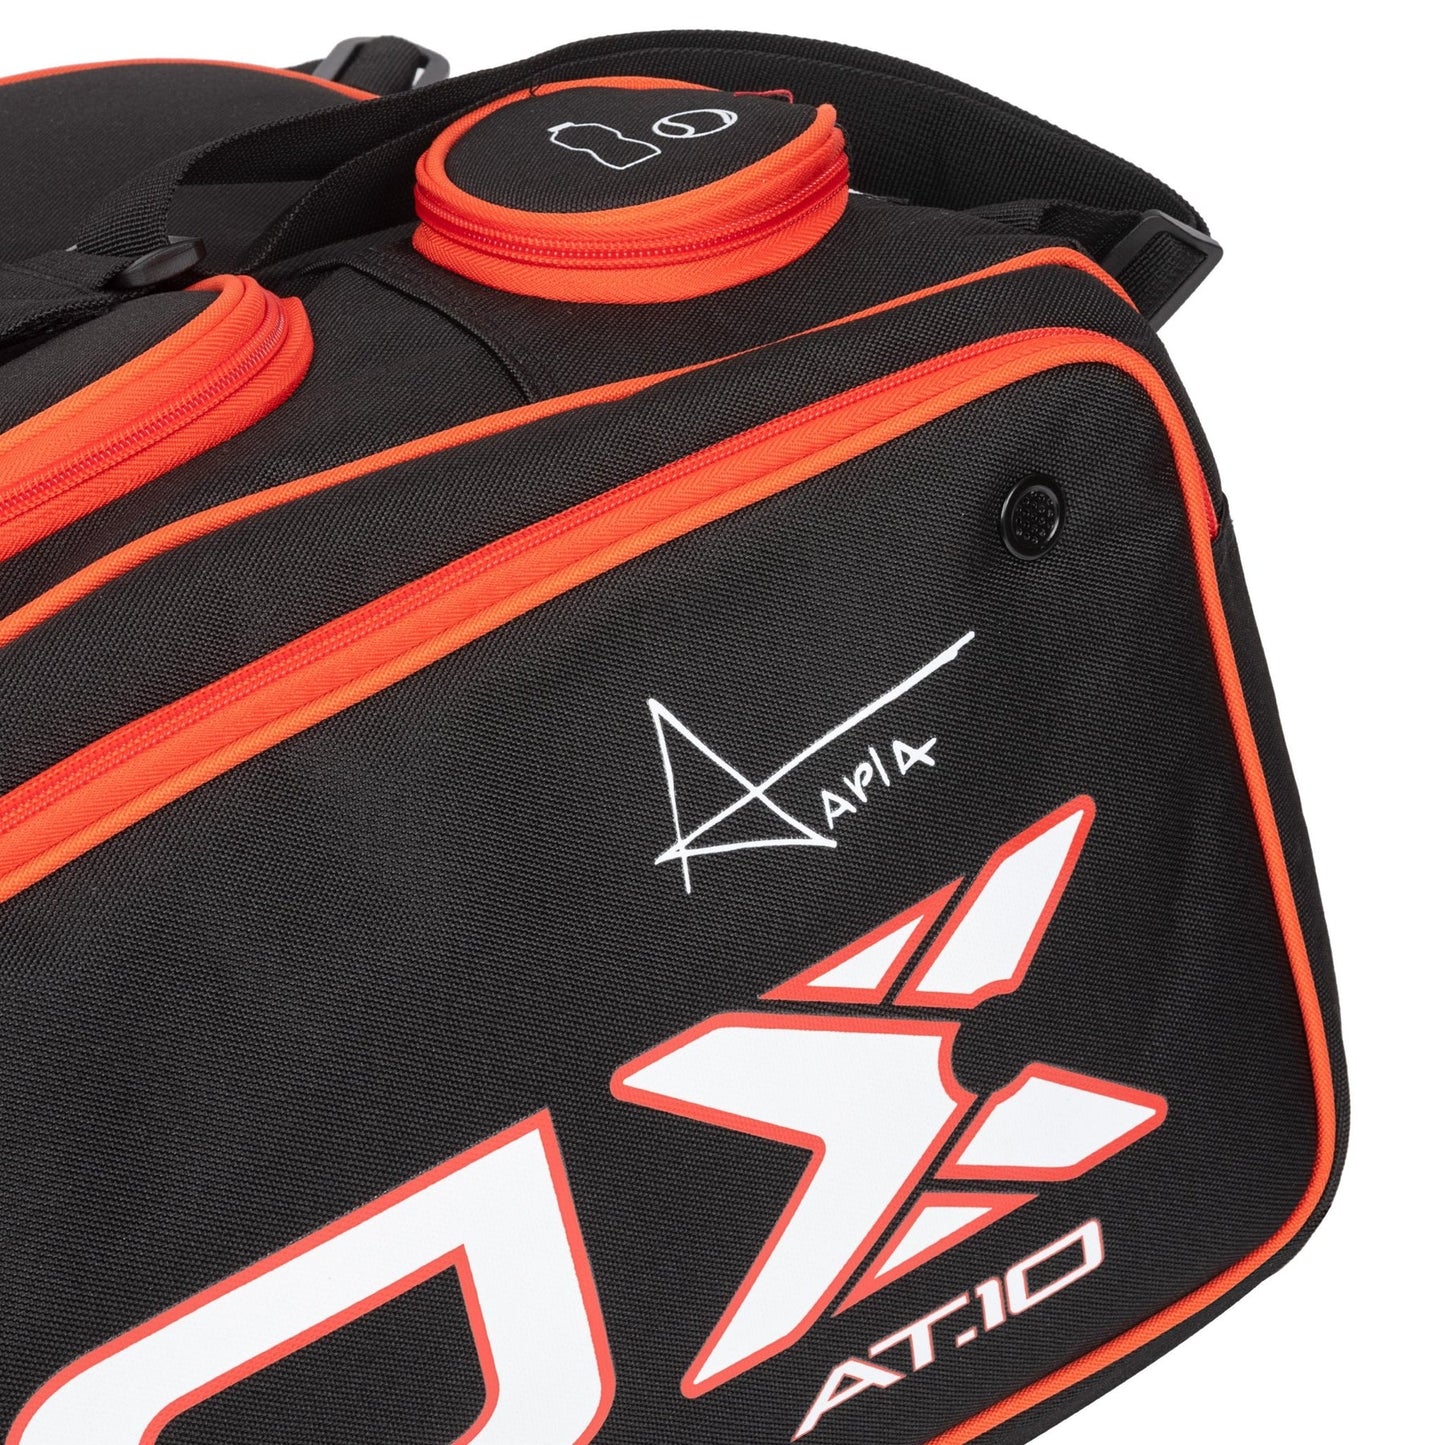 AT10 XXL Competition racket bag by Agustín Tapia